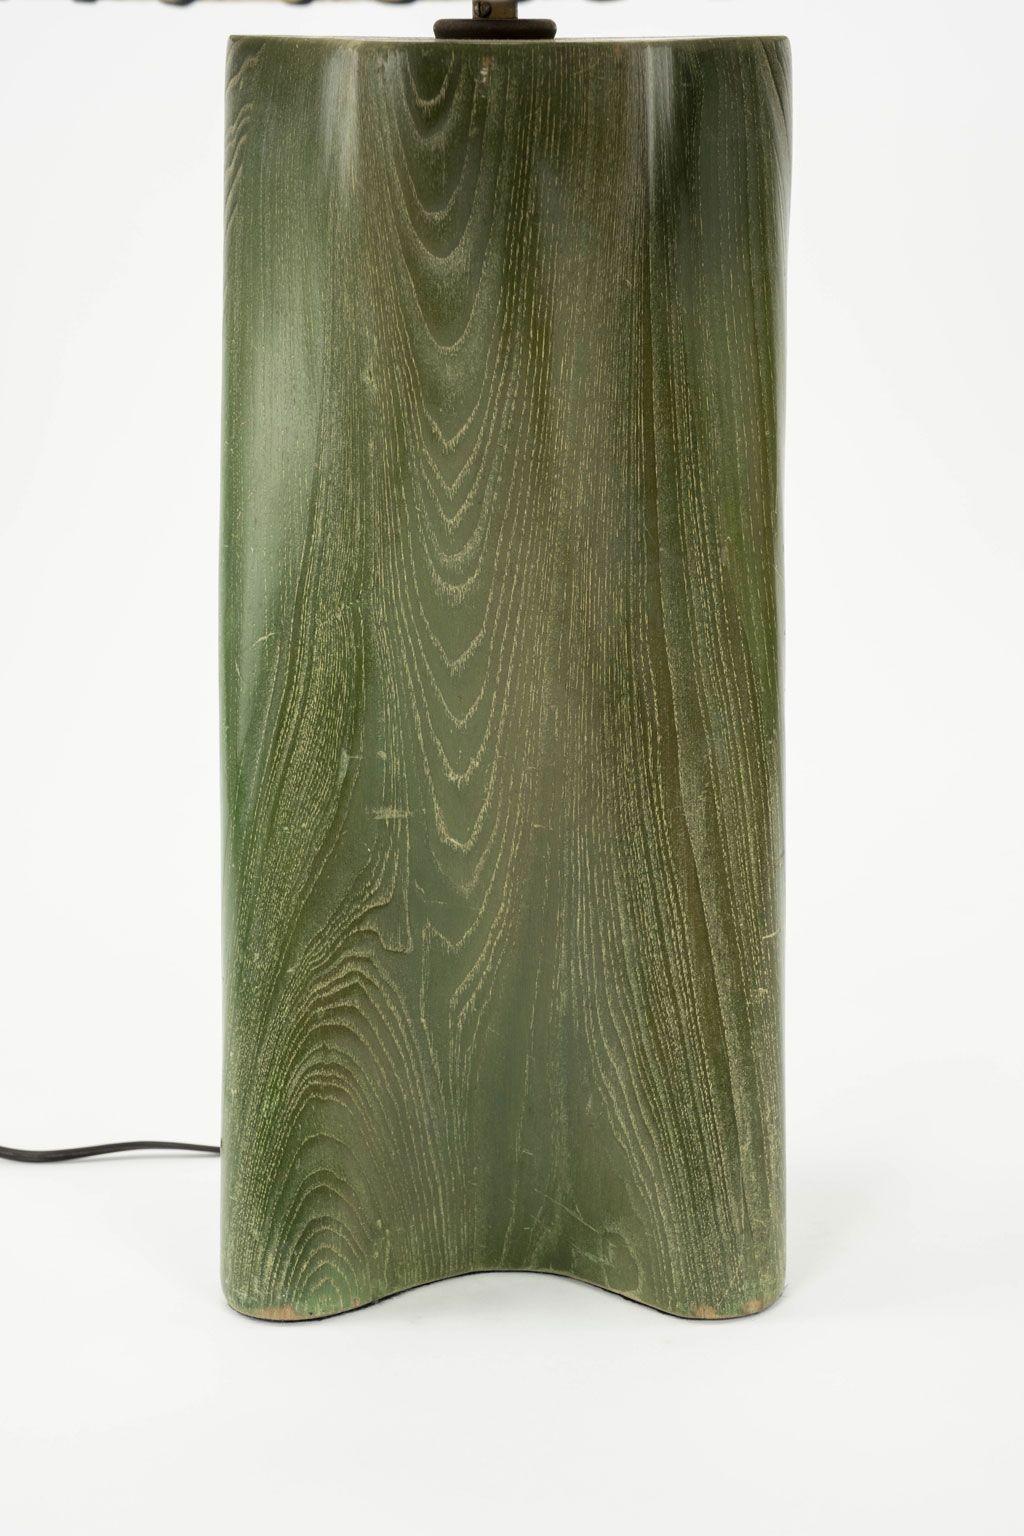 American Modern Green-Dyed Carved Wood Table Lamp For Sale